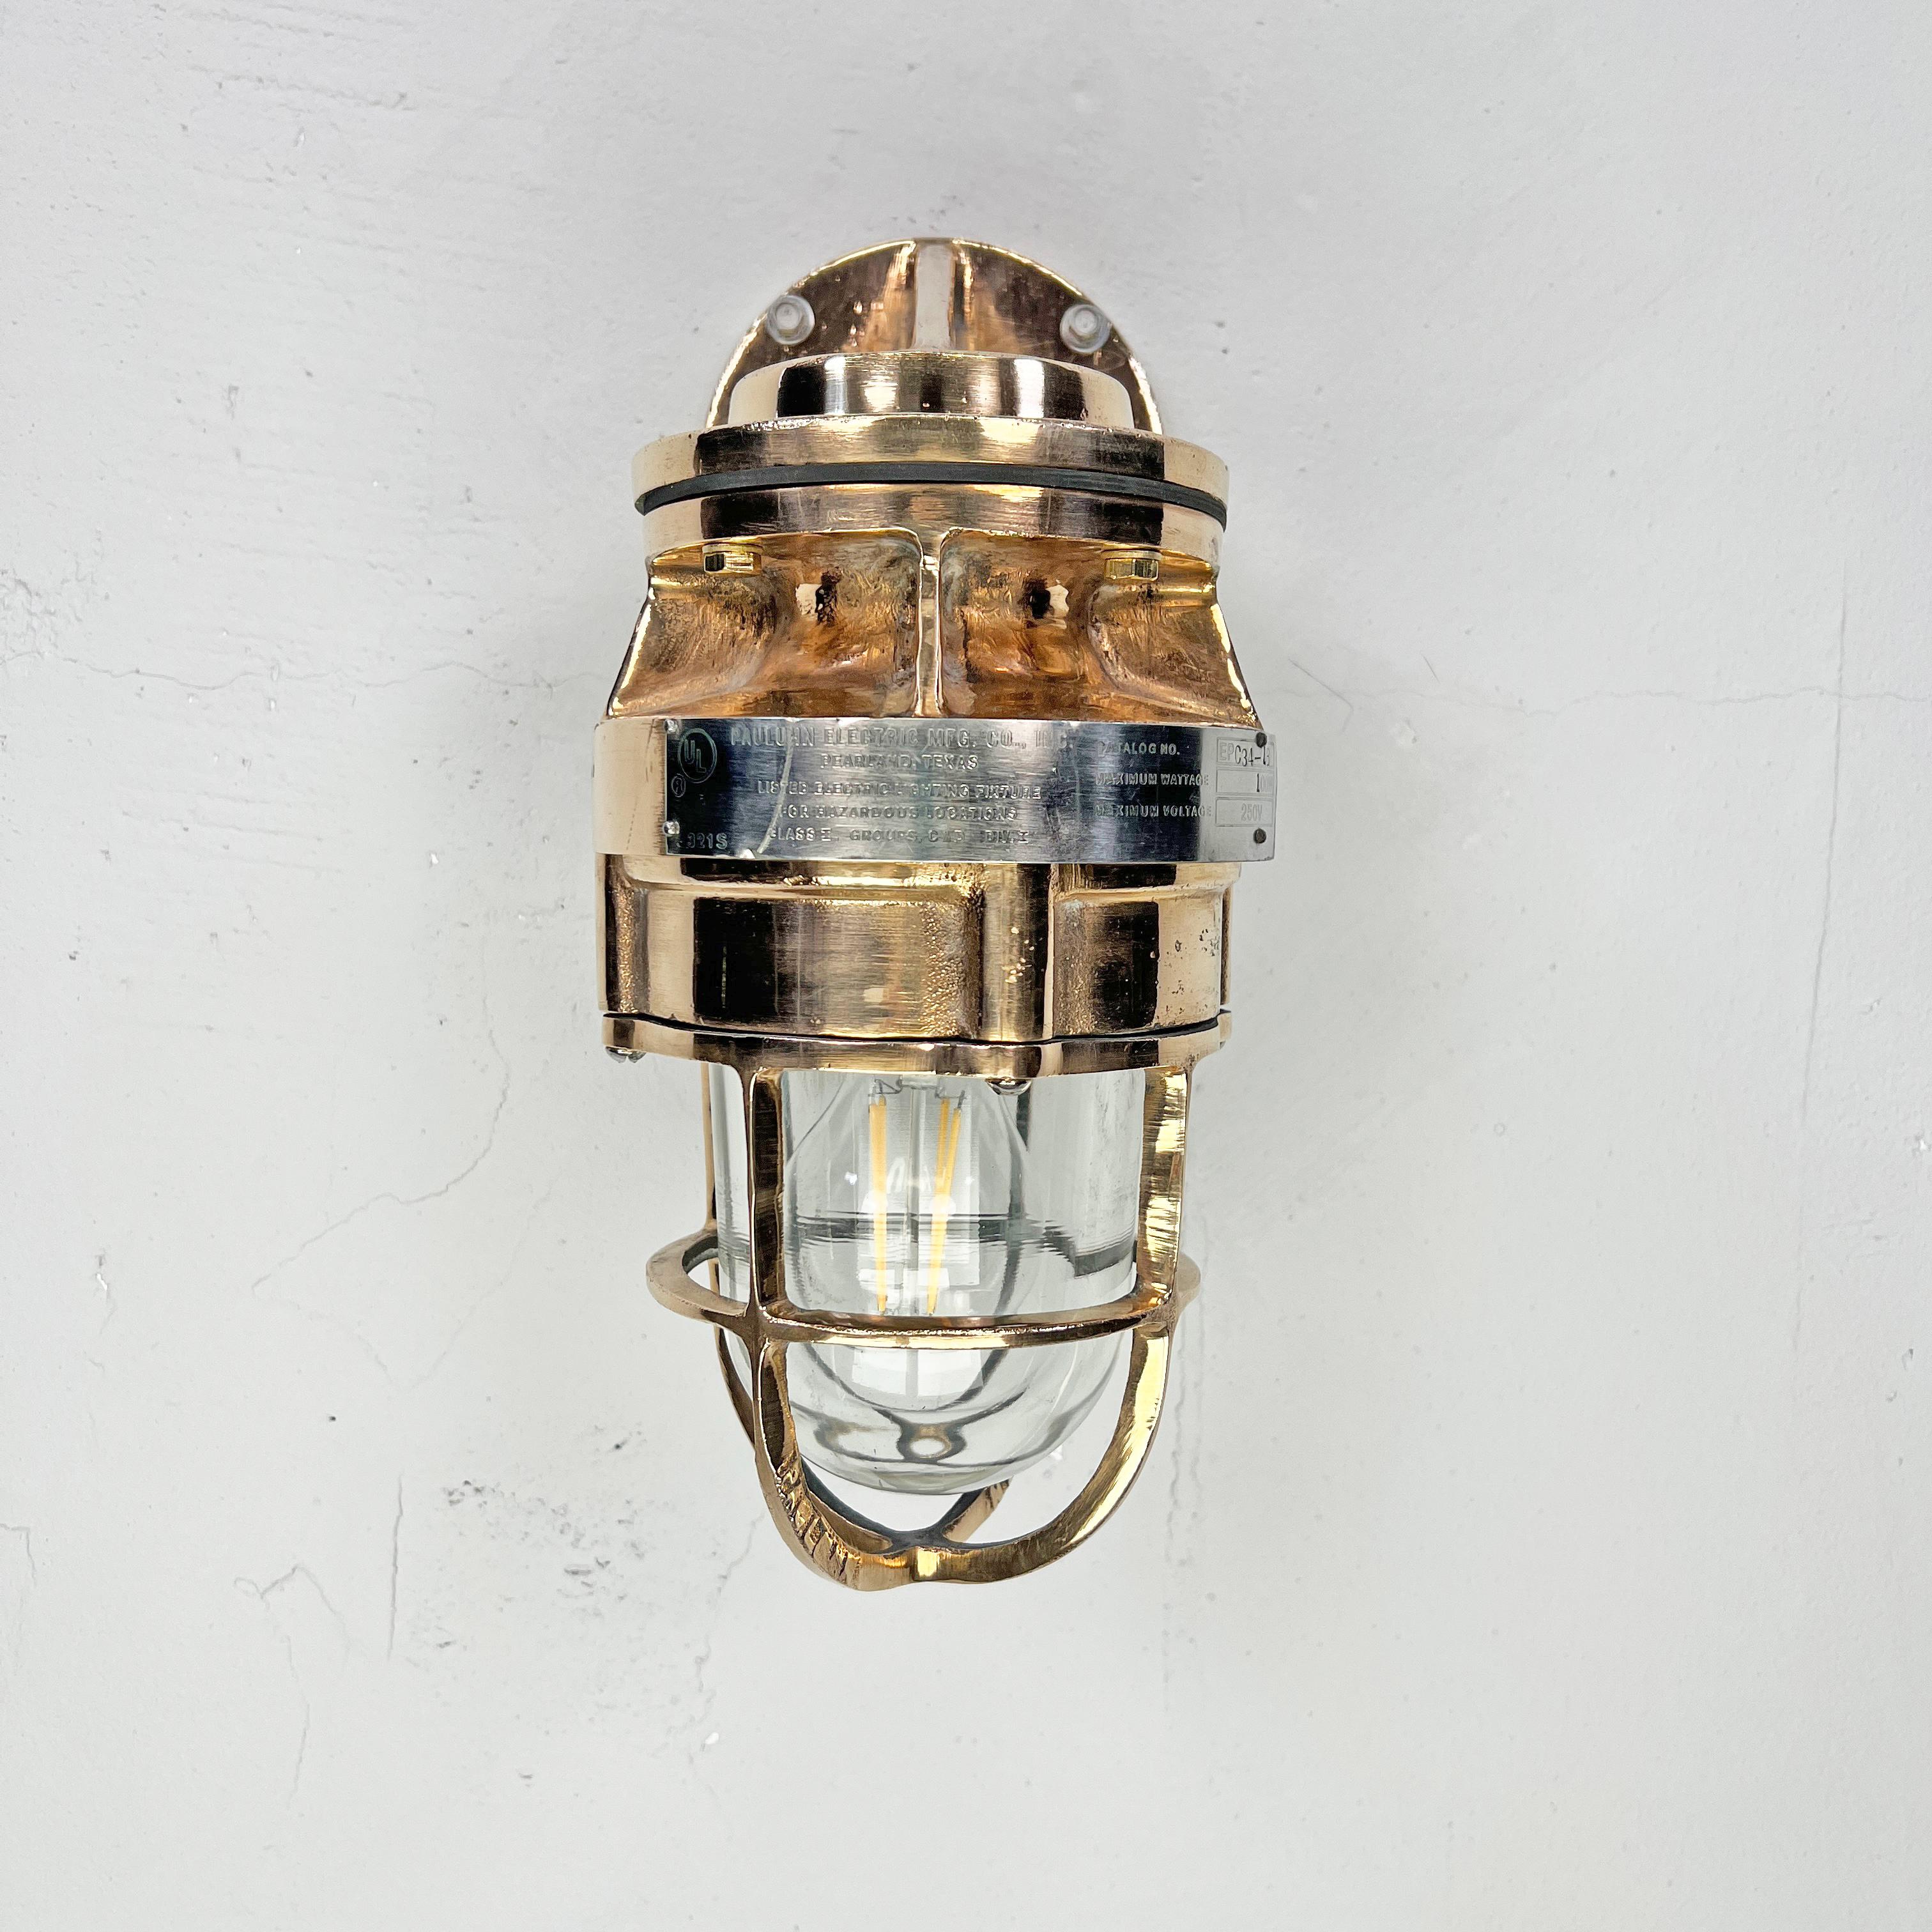 A robust bronze industrial outdoor light reclaimed from decommissioned cargo ships. This is a vintage industrial wall light made by the American company Pauluhn Electric Manufacturing. We have professionally restored this wall light so they are